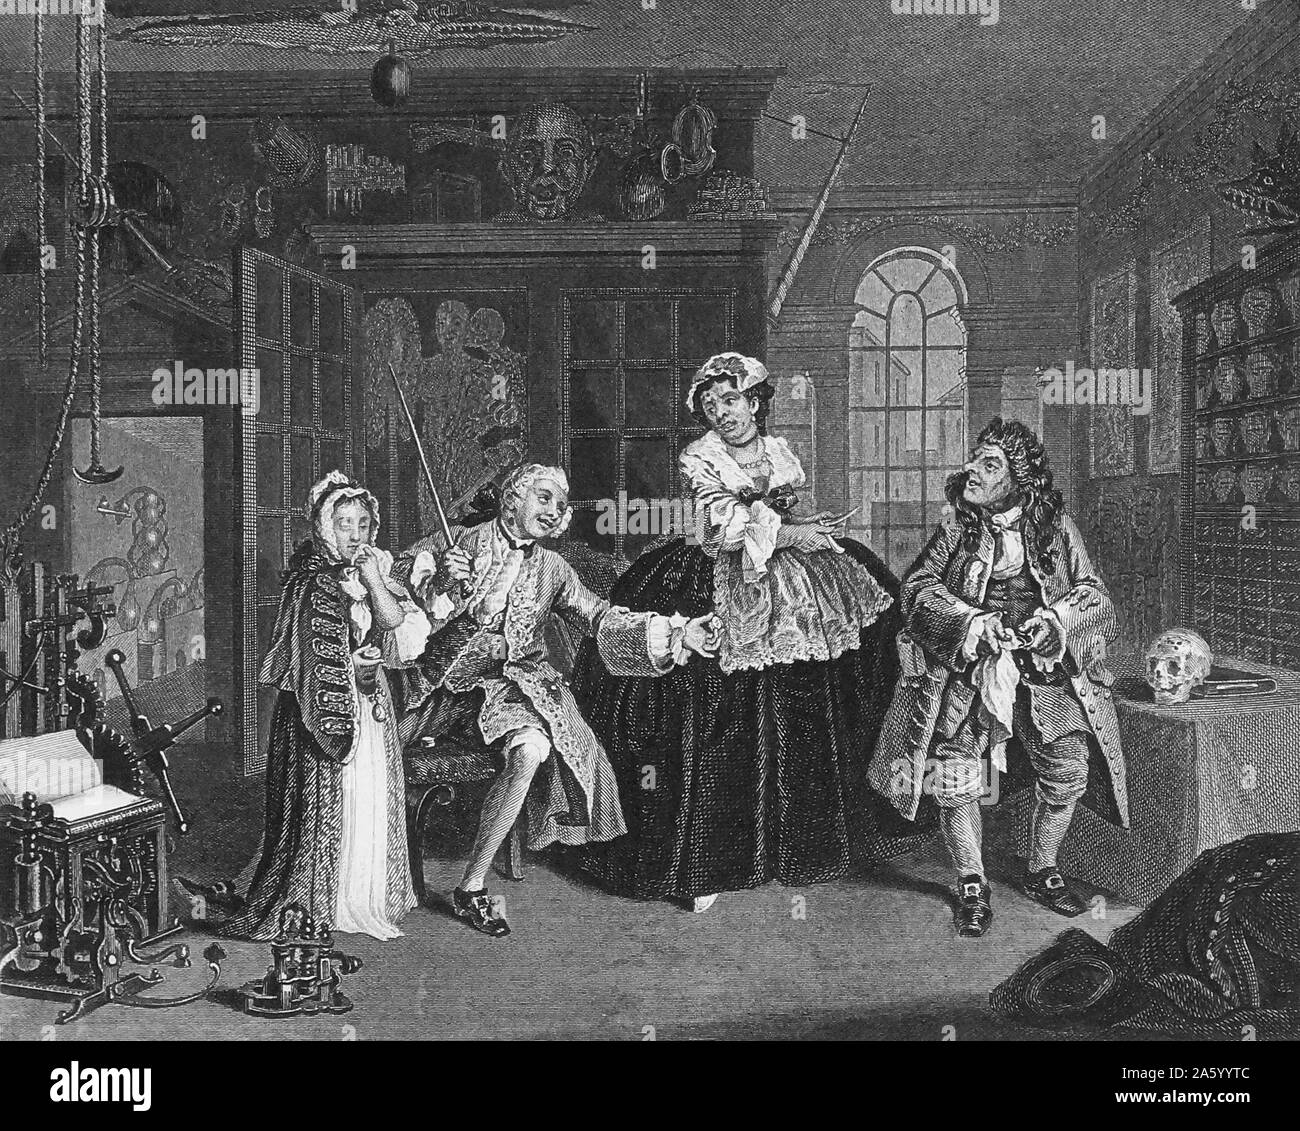 Engraving titled 'Marriage A La Mode' by William Hogarth (1697-1764) English painter, printmaker, pictorial satirist, social critic, and editorial cartoonist who has been credited with pioneering western sequential art. Dated 18th Century. Stock Photo